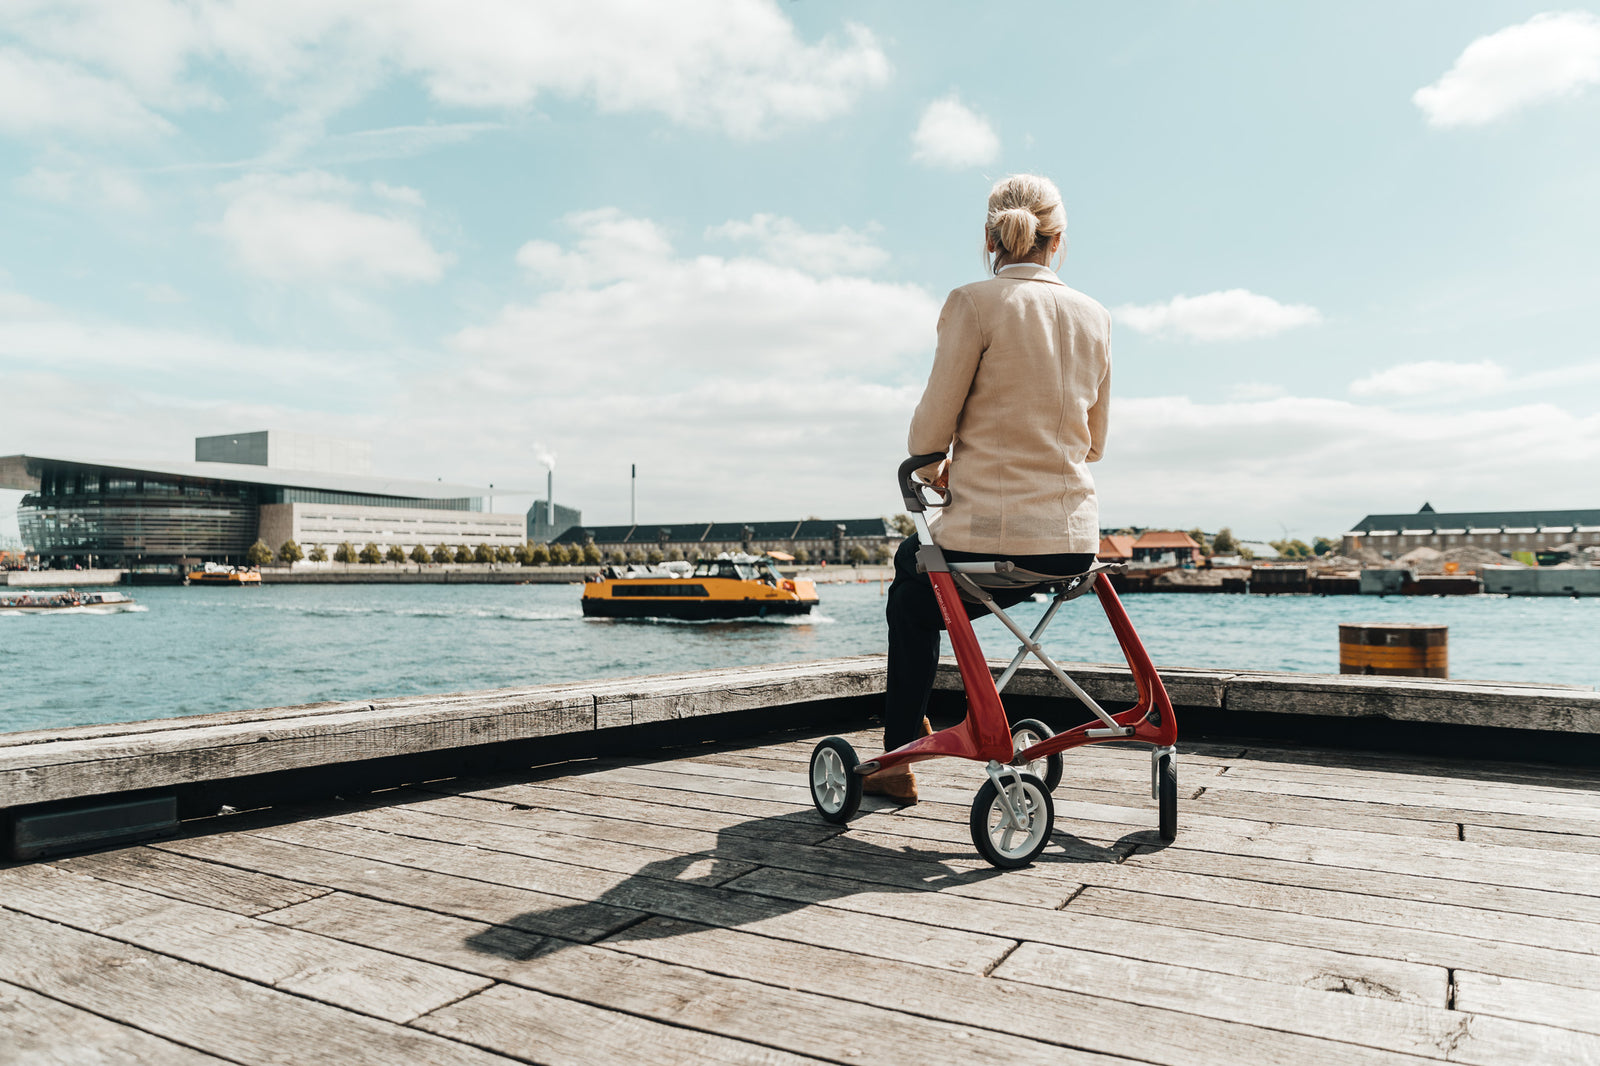 A woman sits on a modern light-weight walking frame, made by byACRE. She is on a timber wharf looking out at a harbour where a yellow ferry passes in front of the Copenhagen Opera House, on a sunny day with blue sky